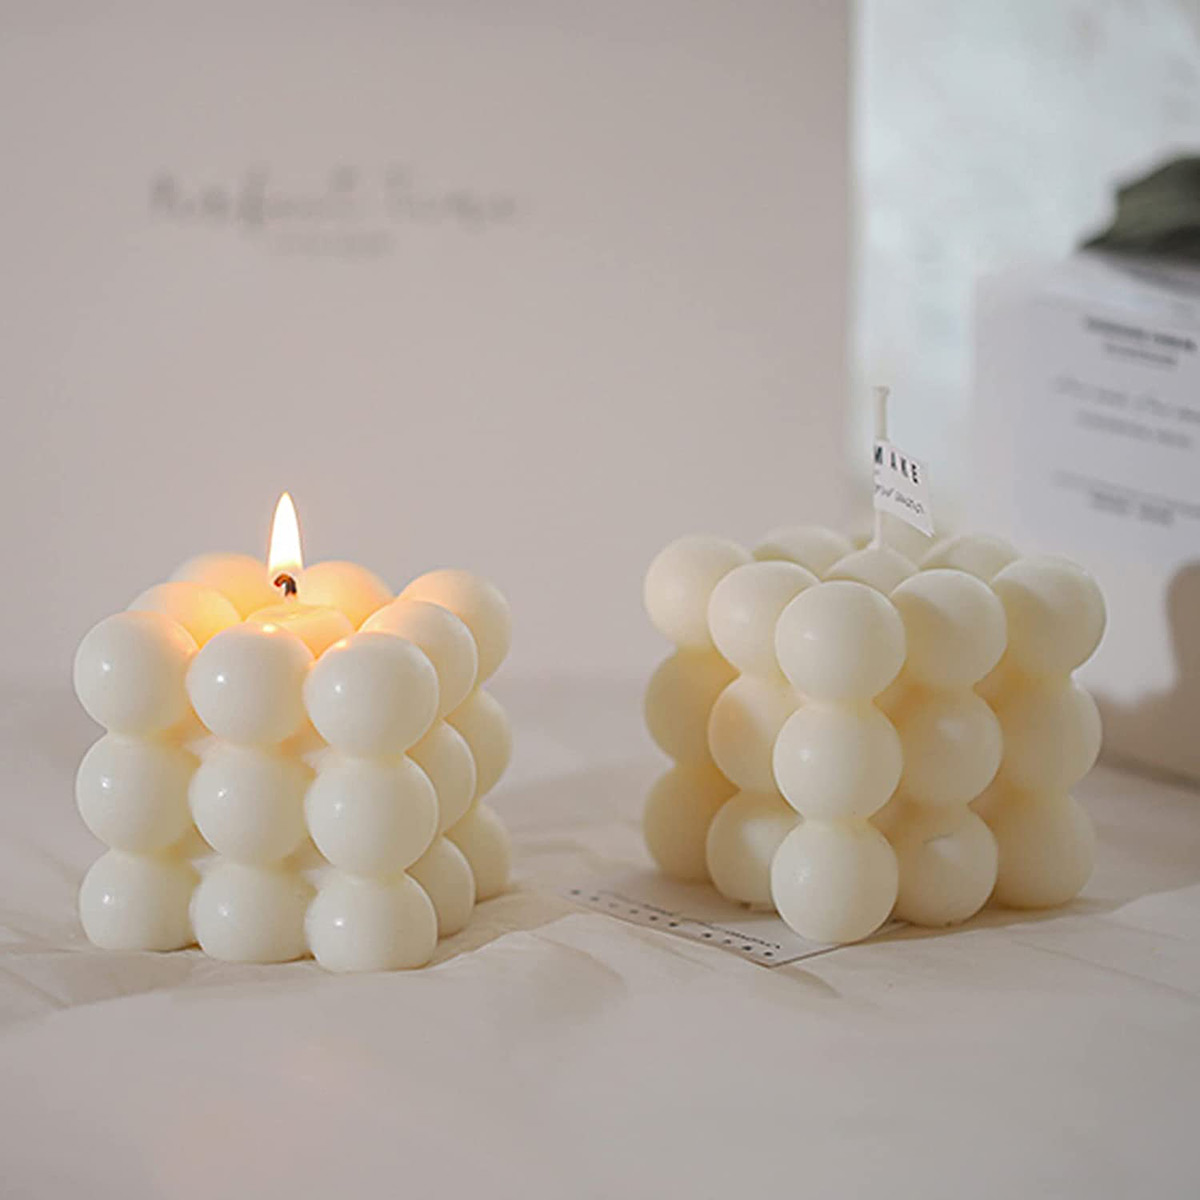 40 Unique Decorative Candles To Add A Soothing Glow To Your Downtime